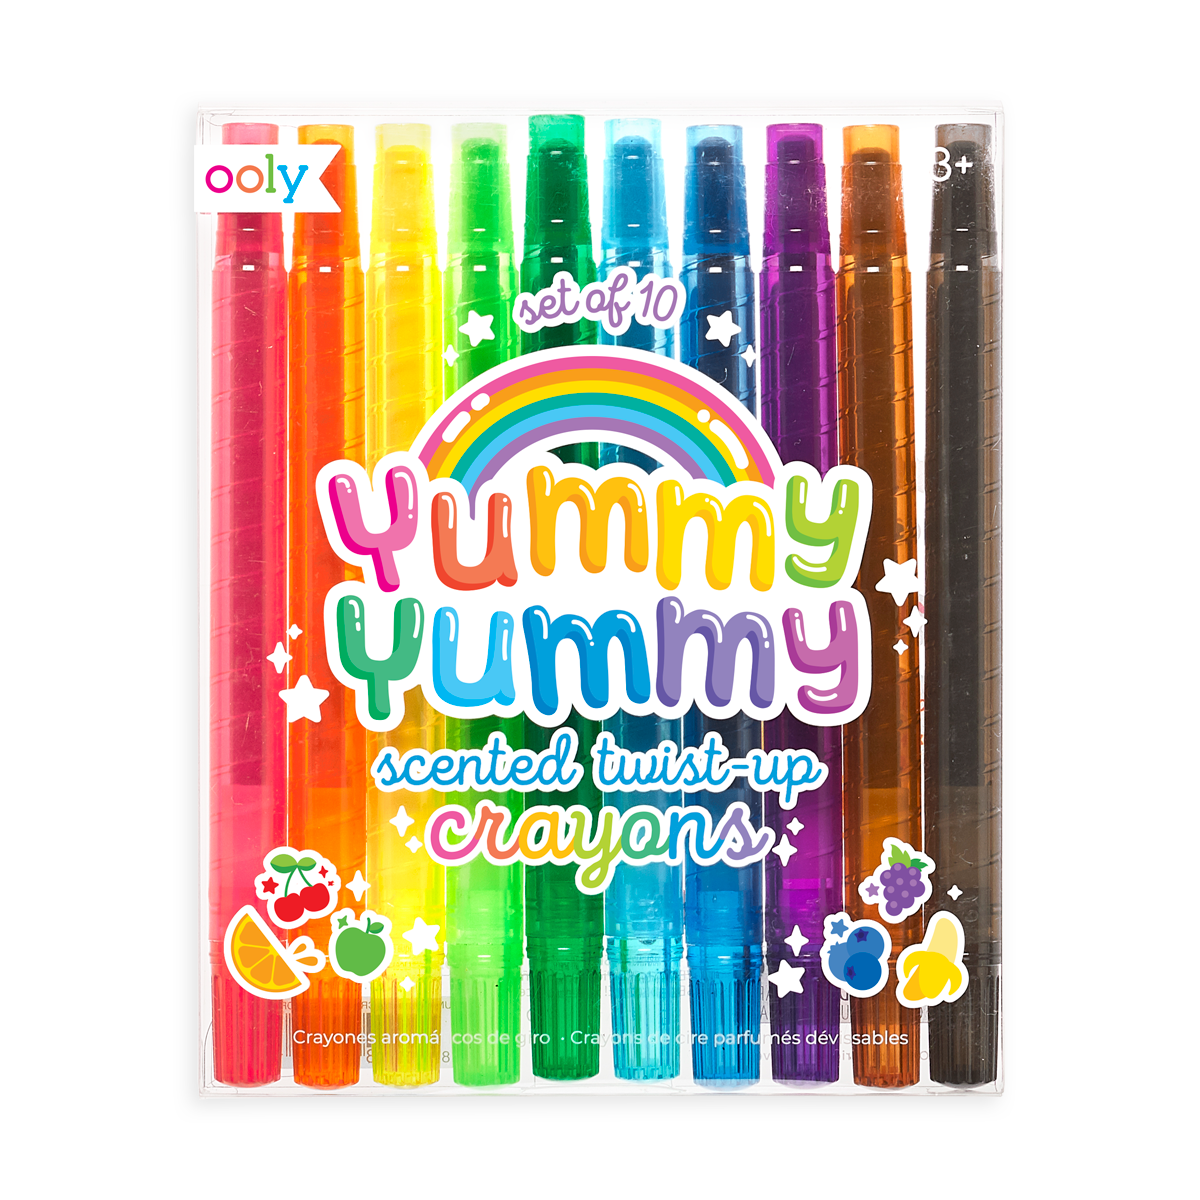 Image of the Yummy Yummy Scented Twist-Up Crayons - Set of 10 in package